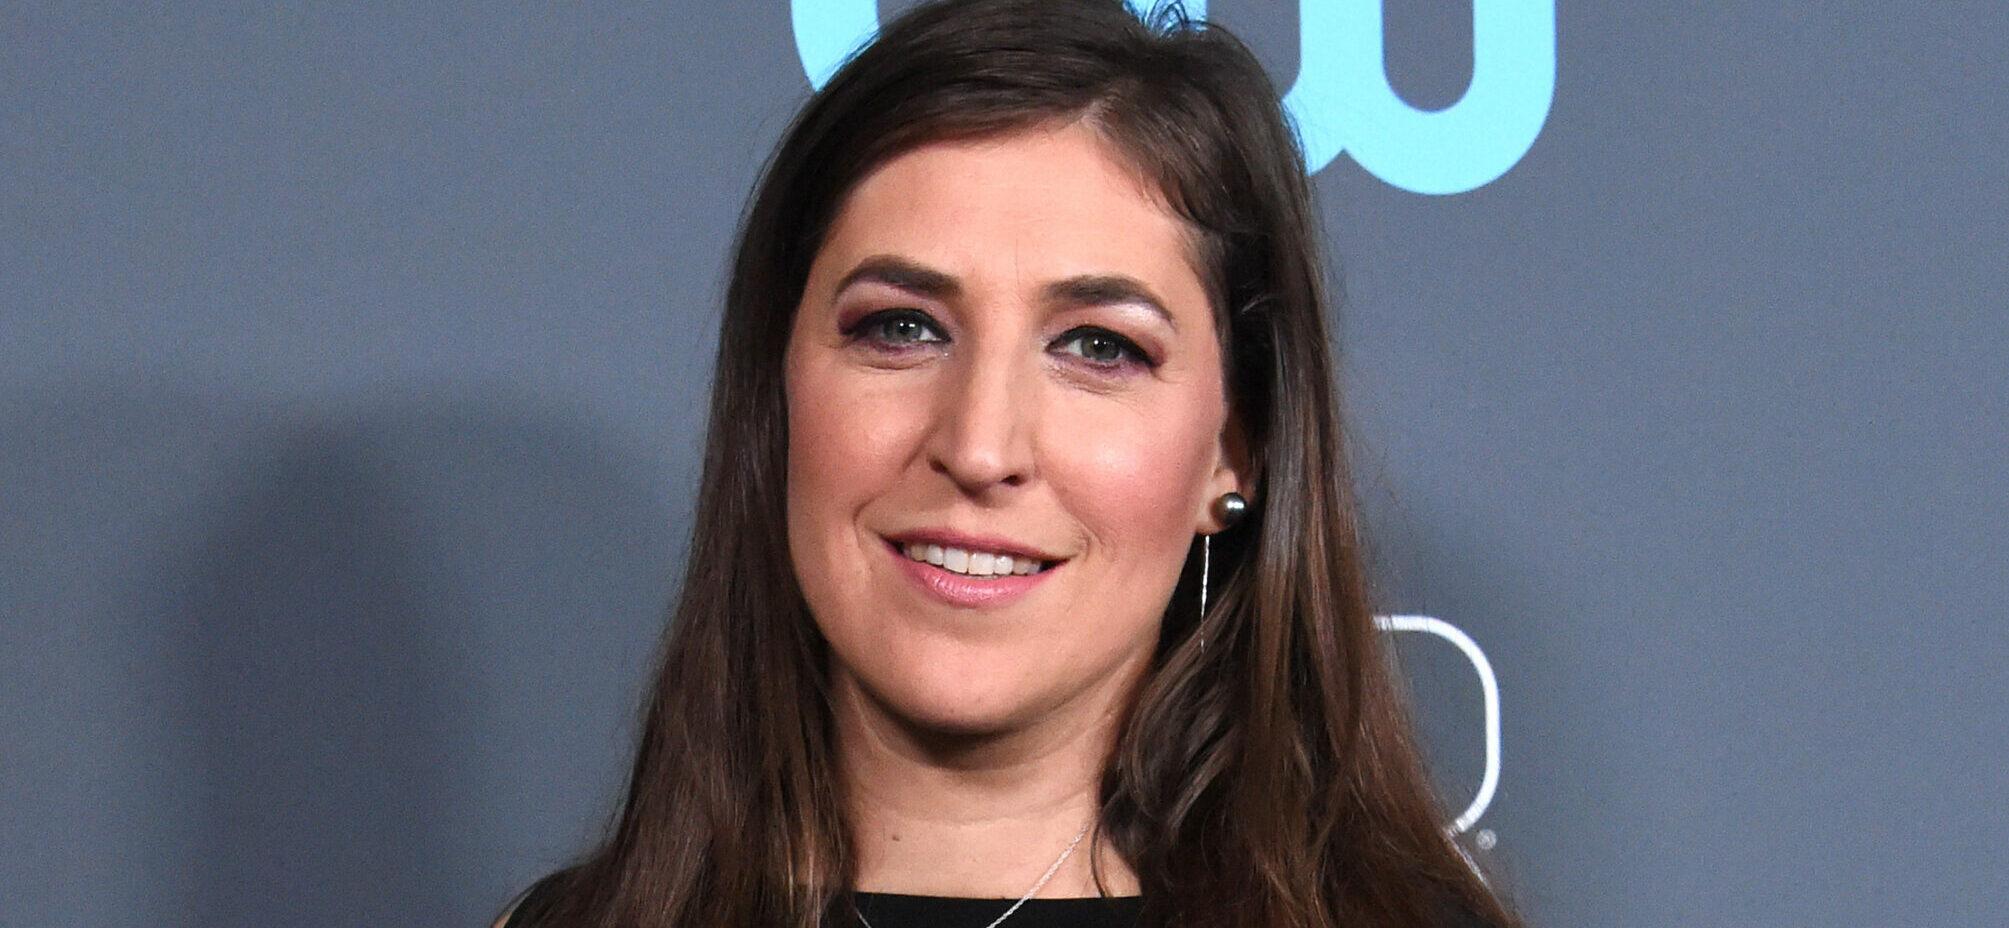 ‘Jeopardy!’ Co-Host Mayim Bialik Opens Up About Feeling ‘Worthless’